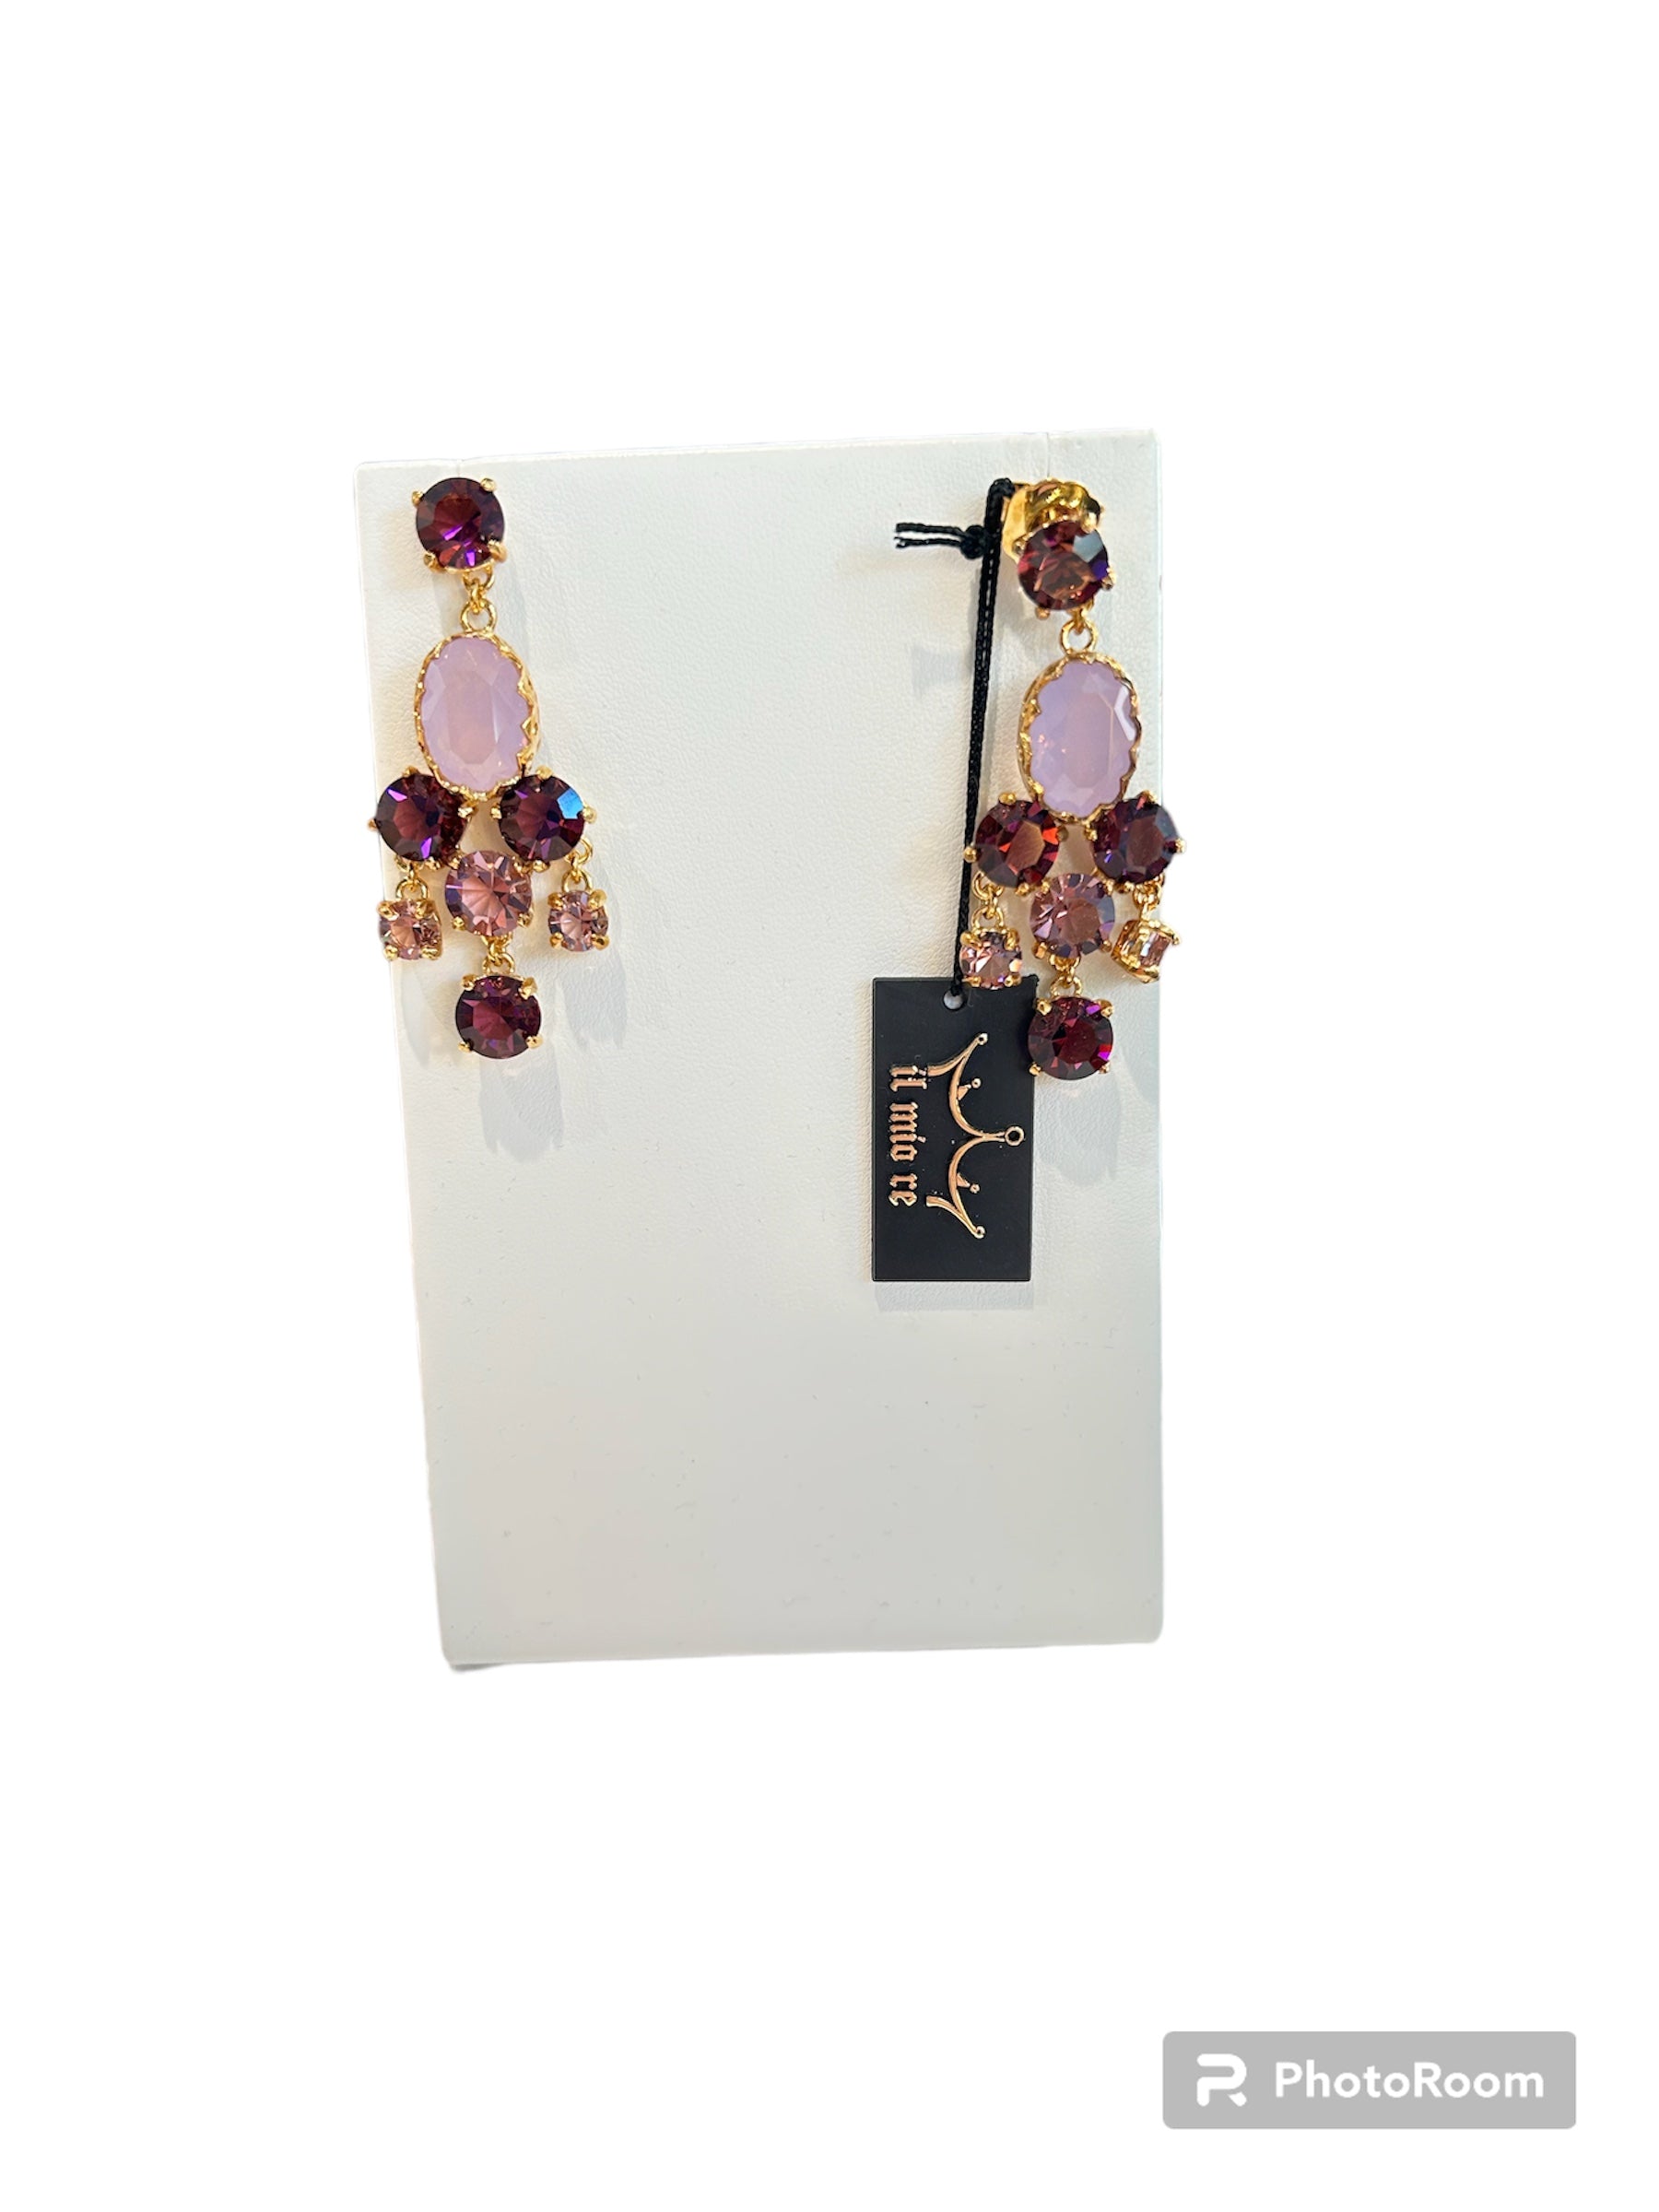 IL Mio Re - Earrings with rose quartz and amethyst in gilded bronze - ILMIORE OR 050